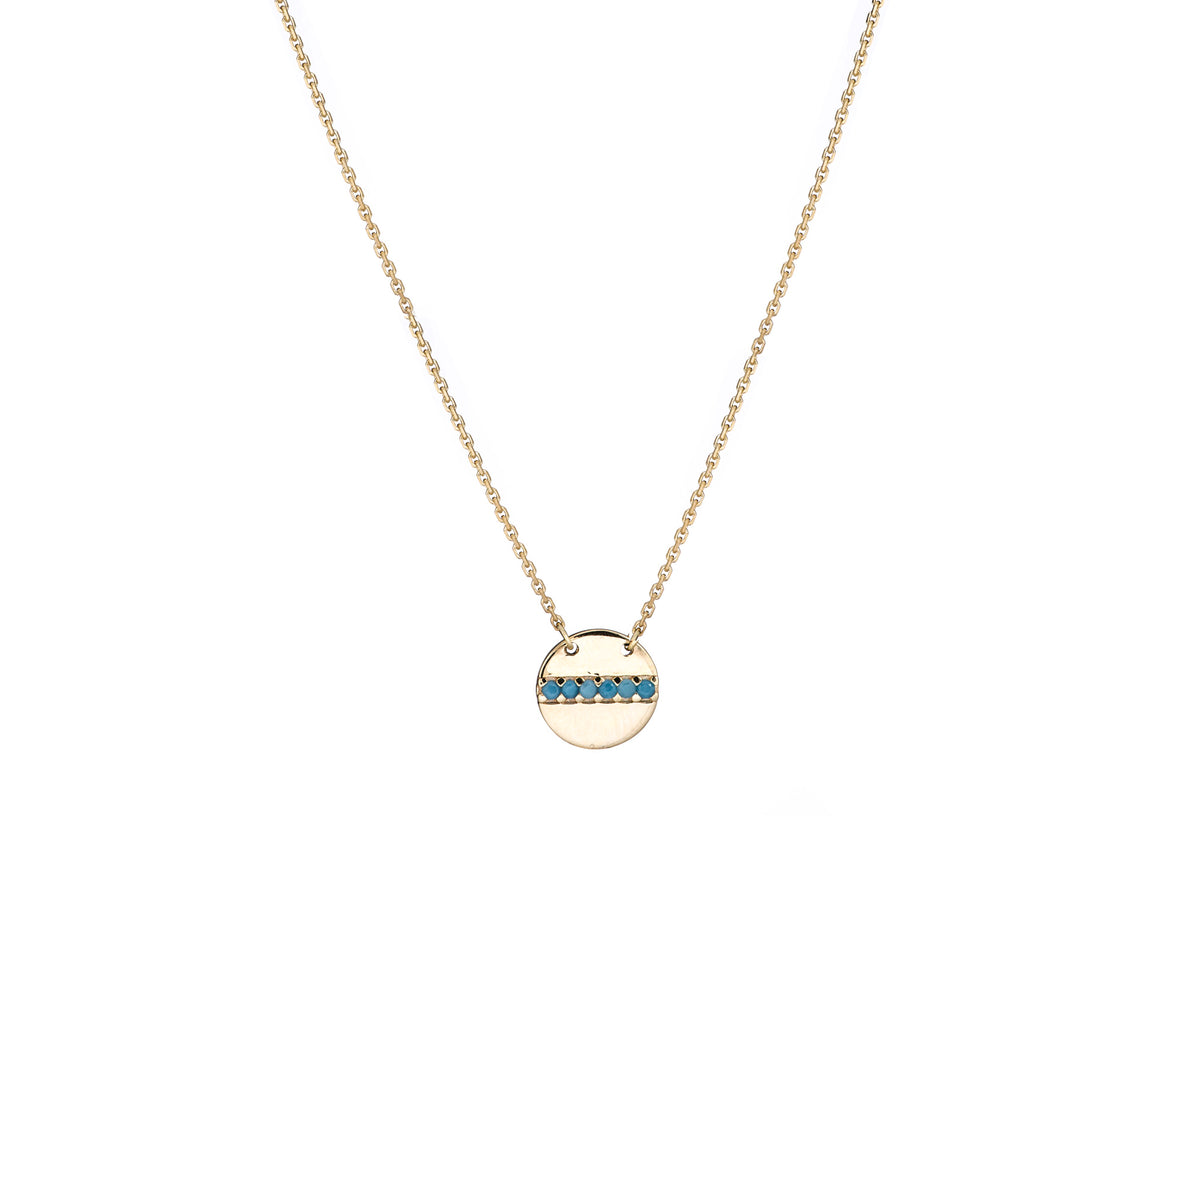 14K Yellow Gold Disc Pendant Necklace, 16" To 18" Adjustable fine designer jewelry for men and women